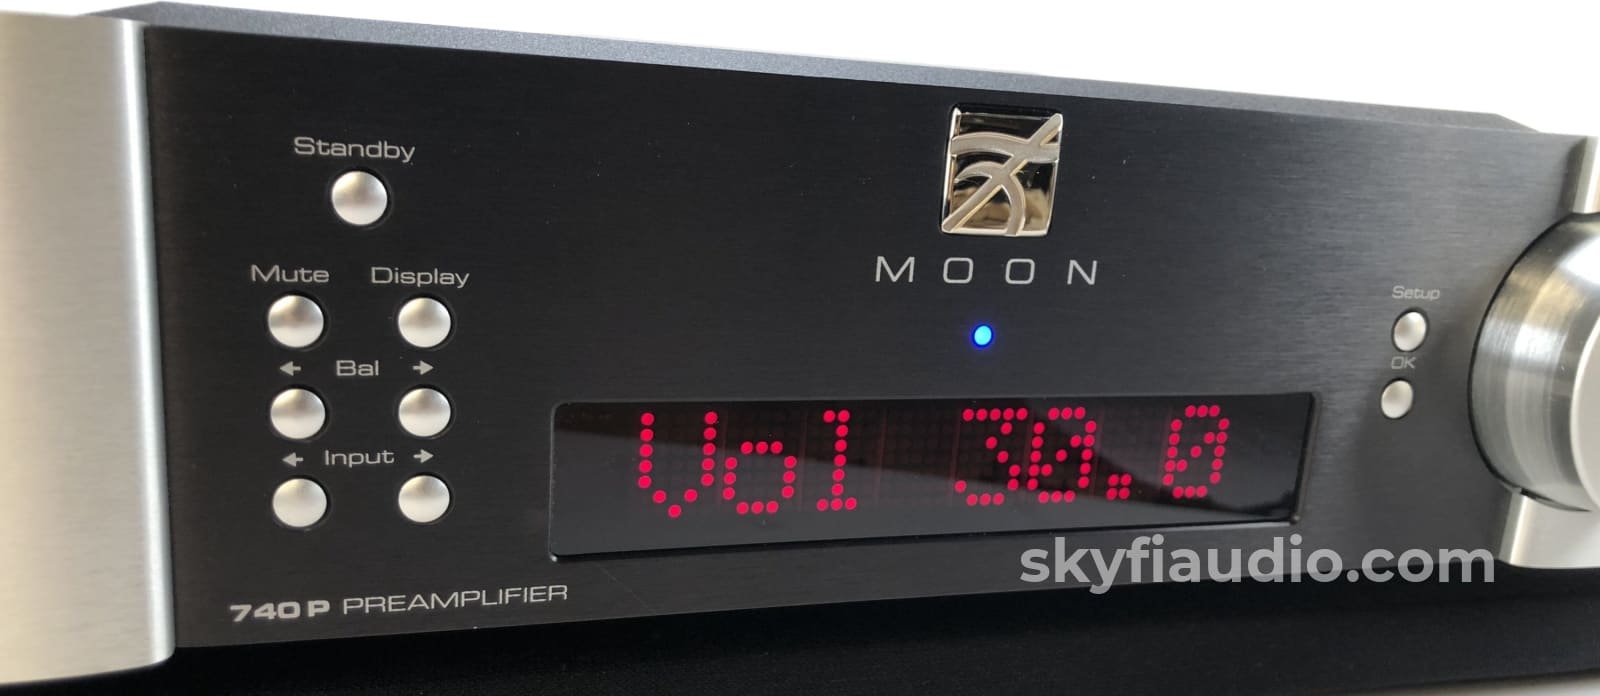 Simaudio Moon Evolution 740P Analog Preamplifier - Complete W/Remote Box And Manual